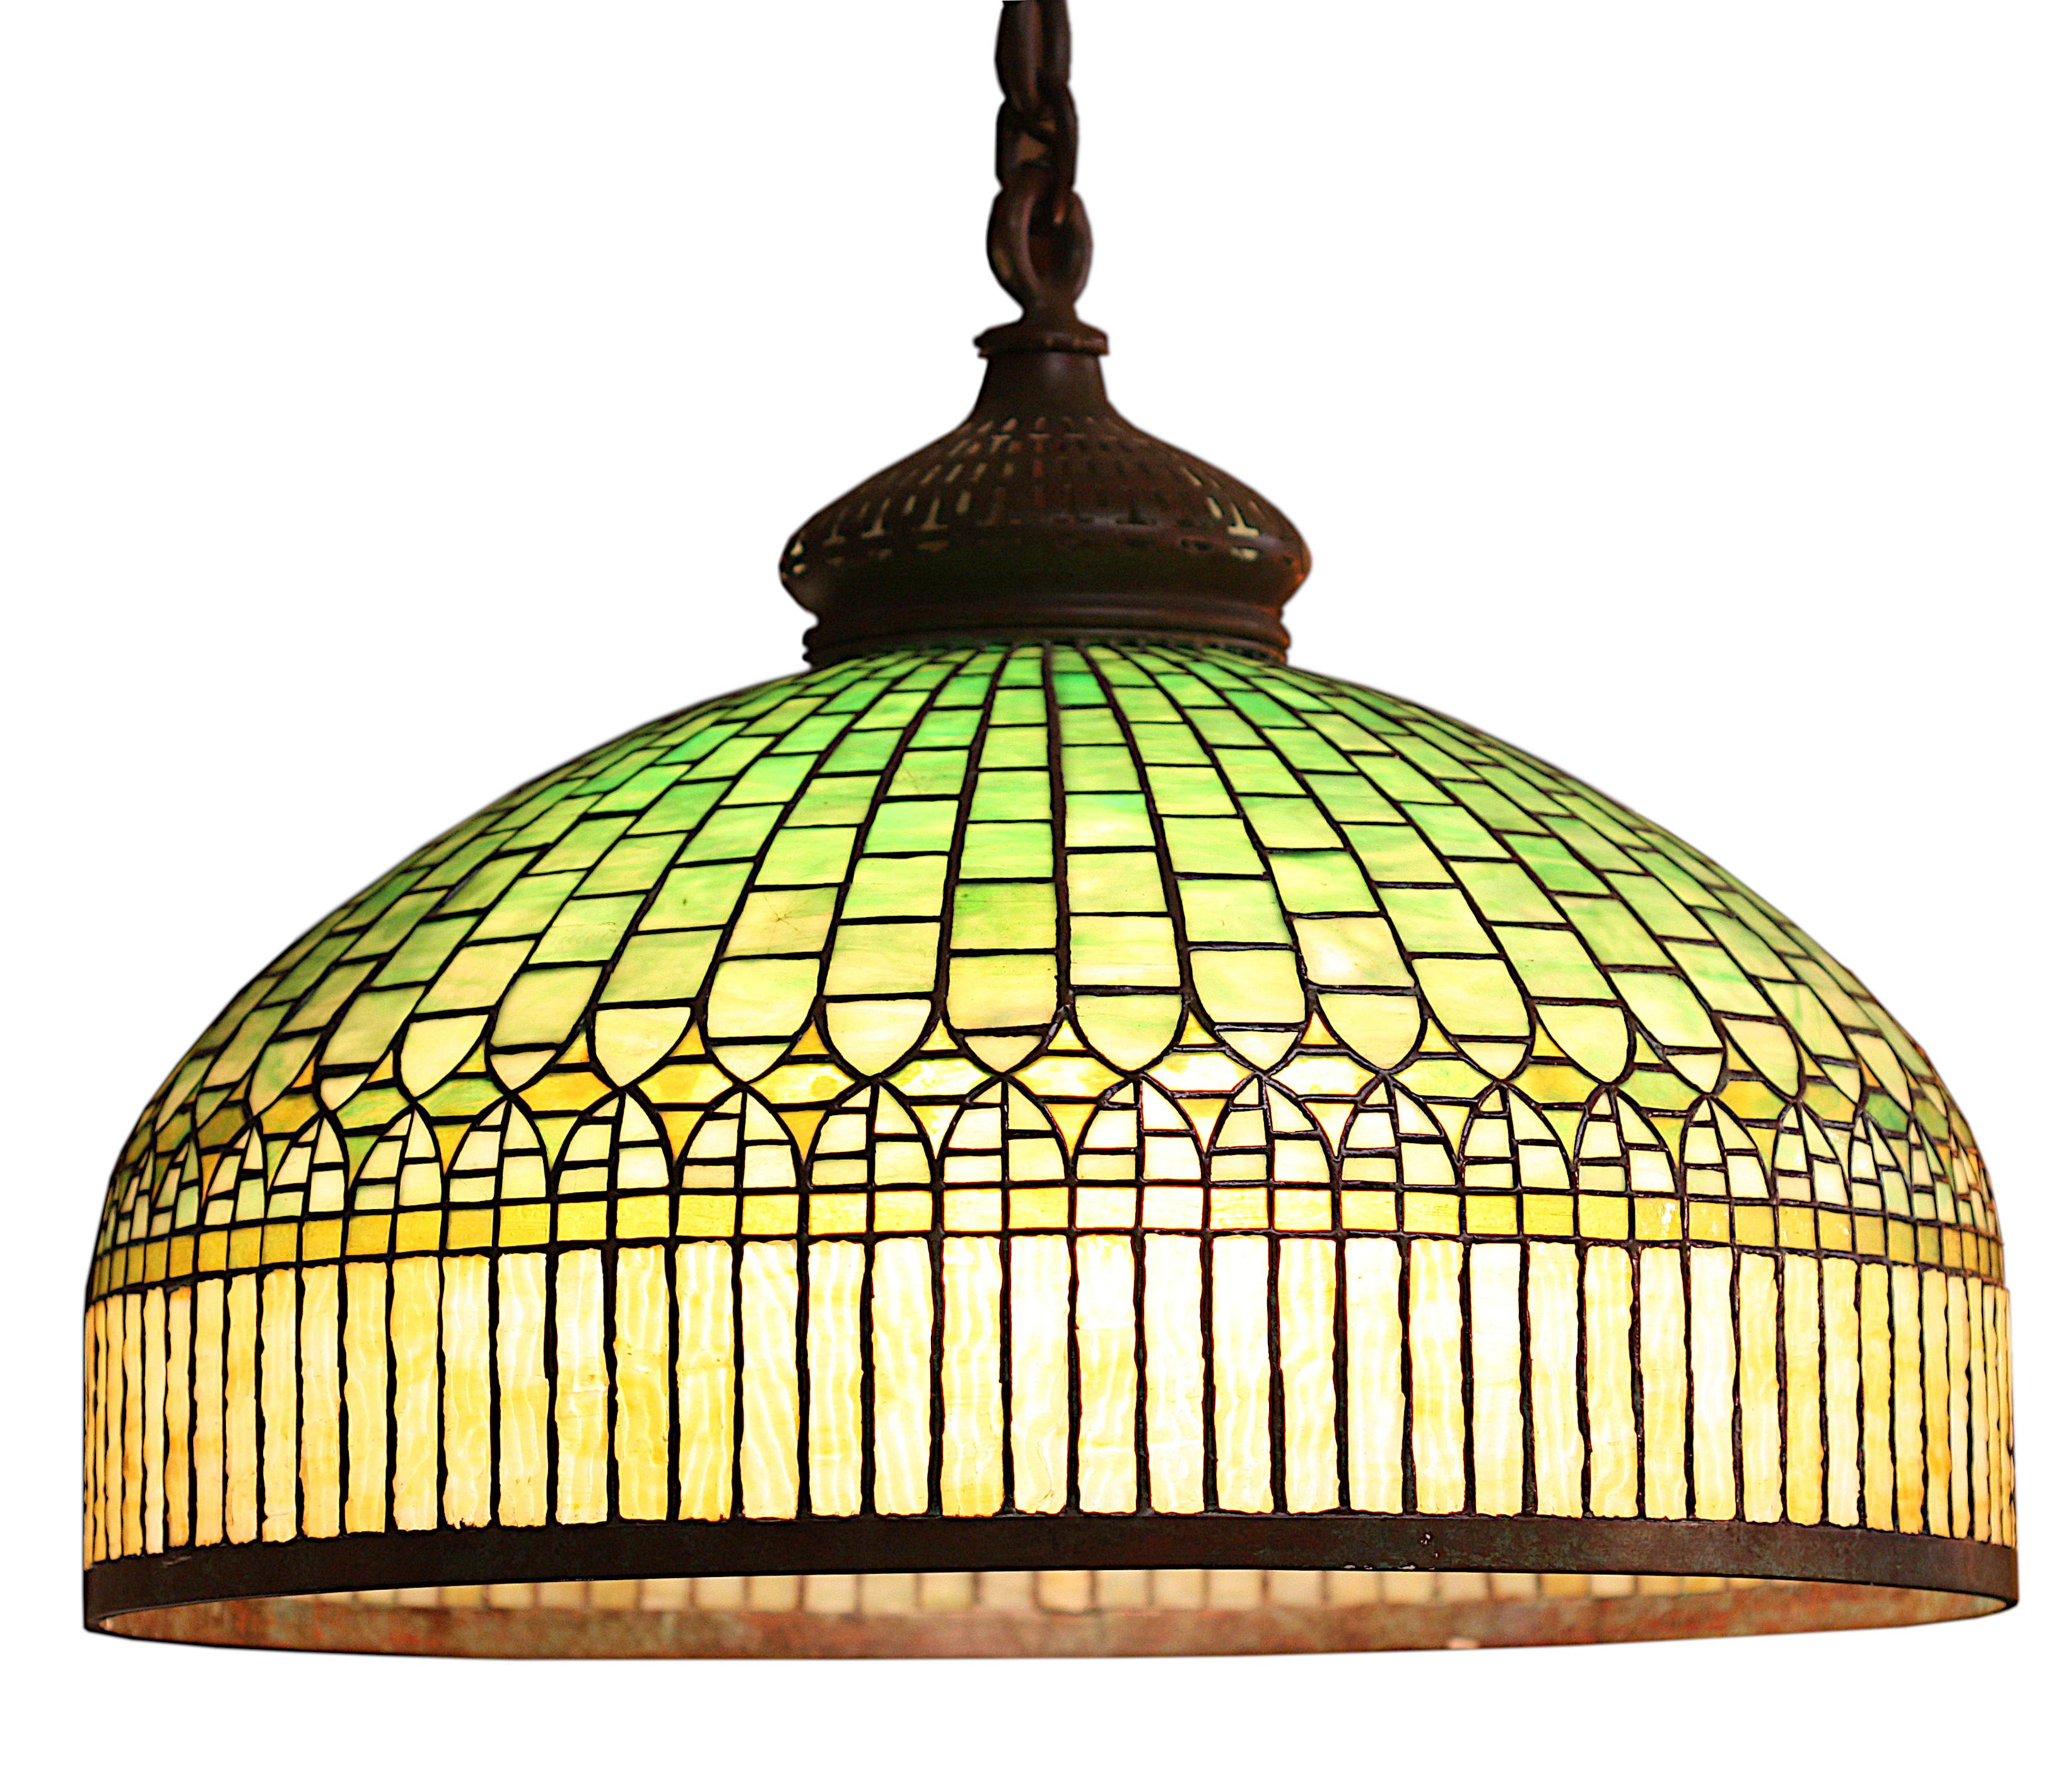 'Curtain Border' Chandelier, Stamped Tiffany Studios, Christie's NY Provenance For Sale 6